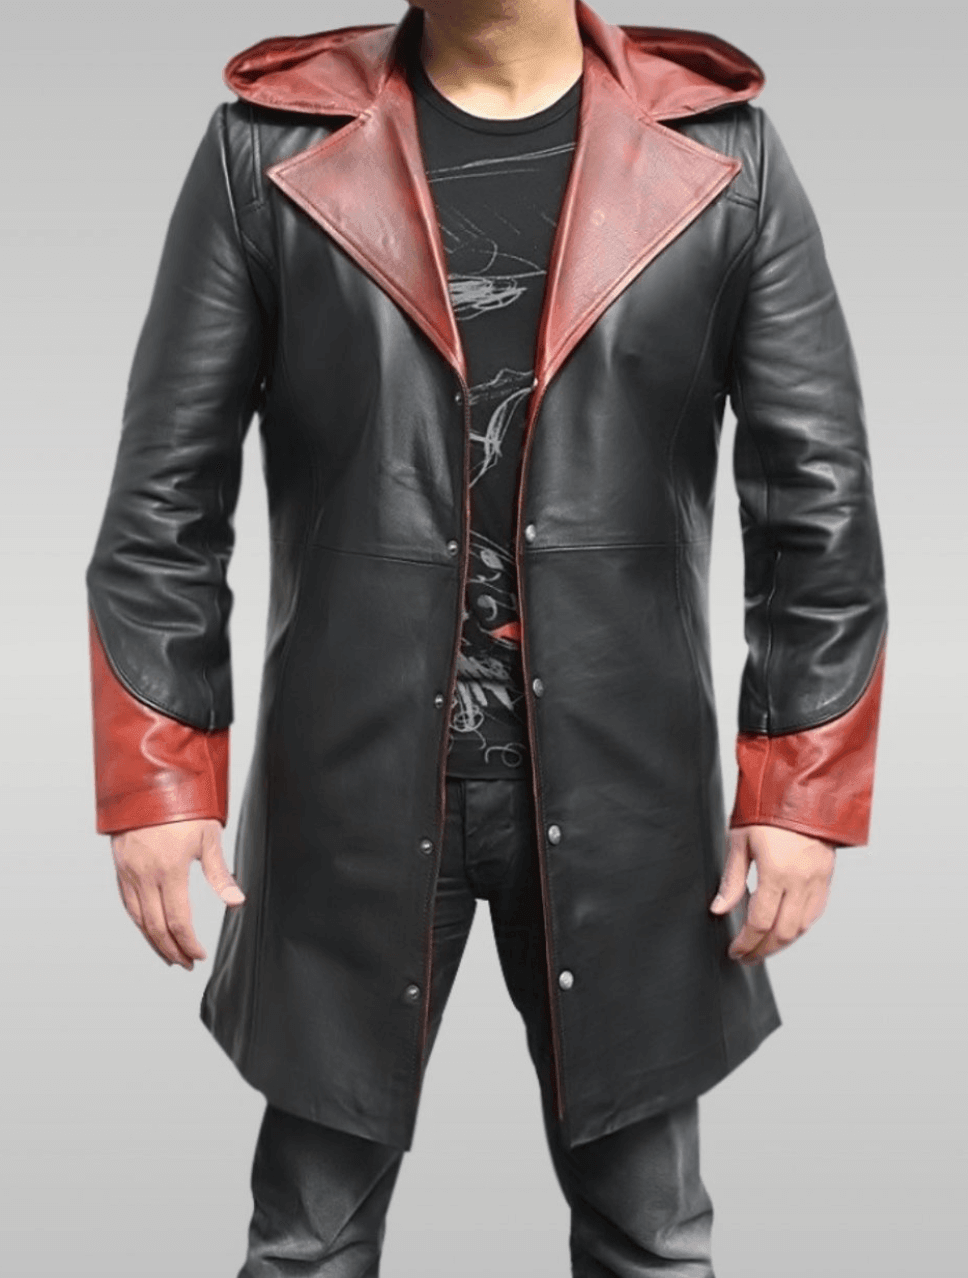 Devil May Cry Dante Jacket Black Leather Hooded Coat Front